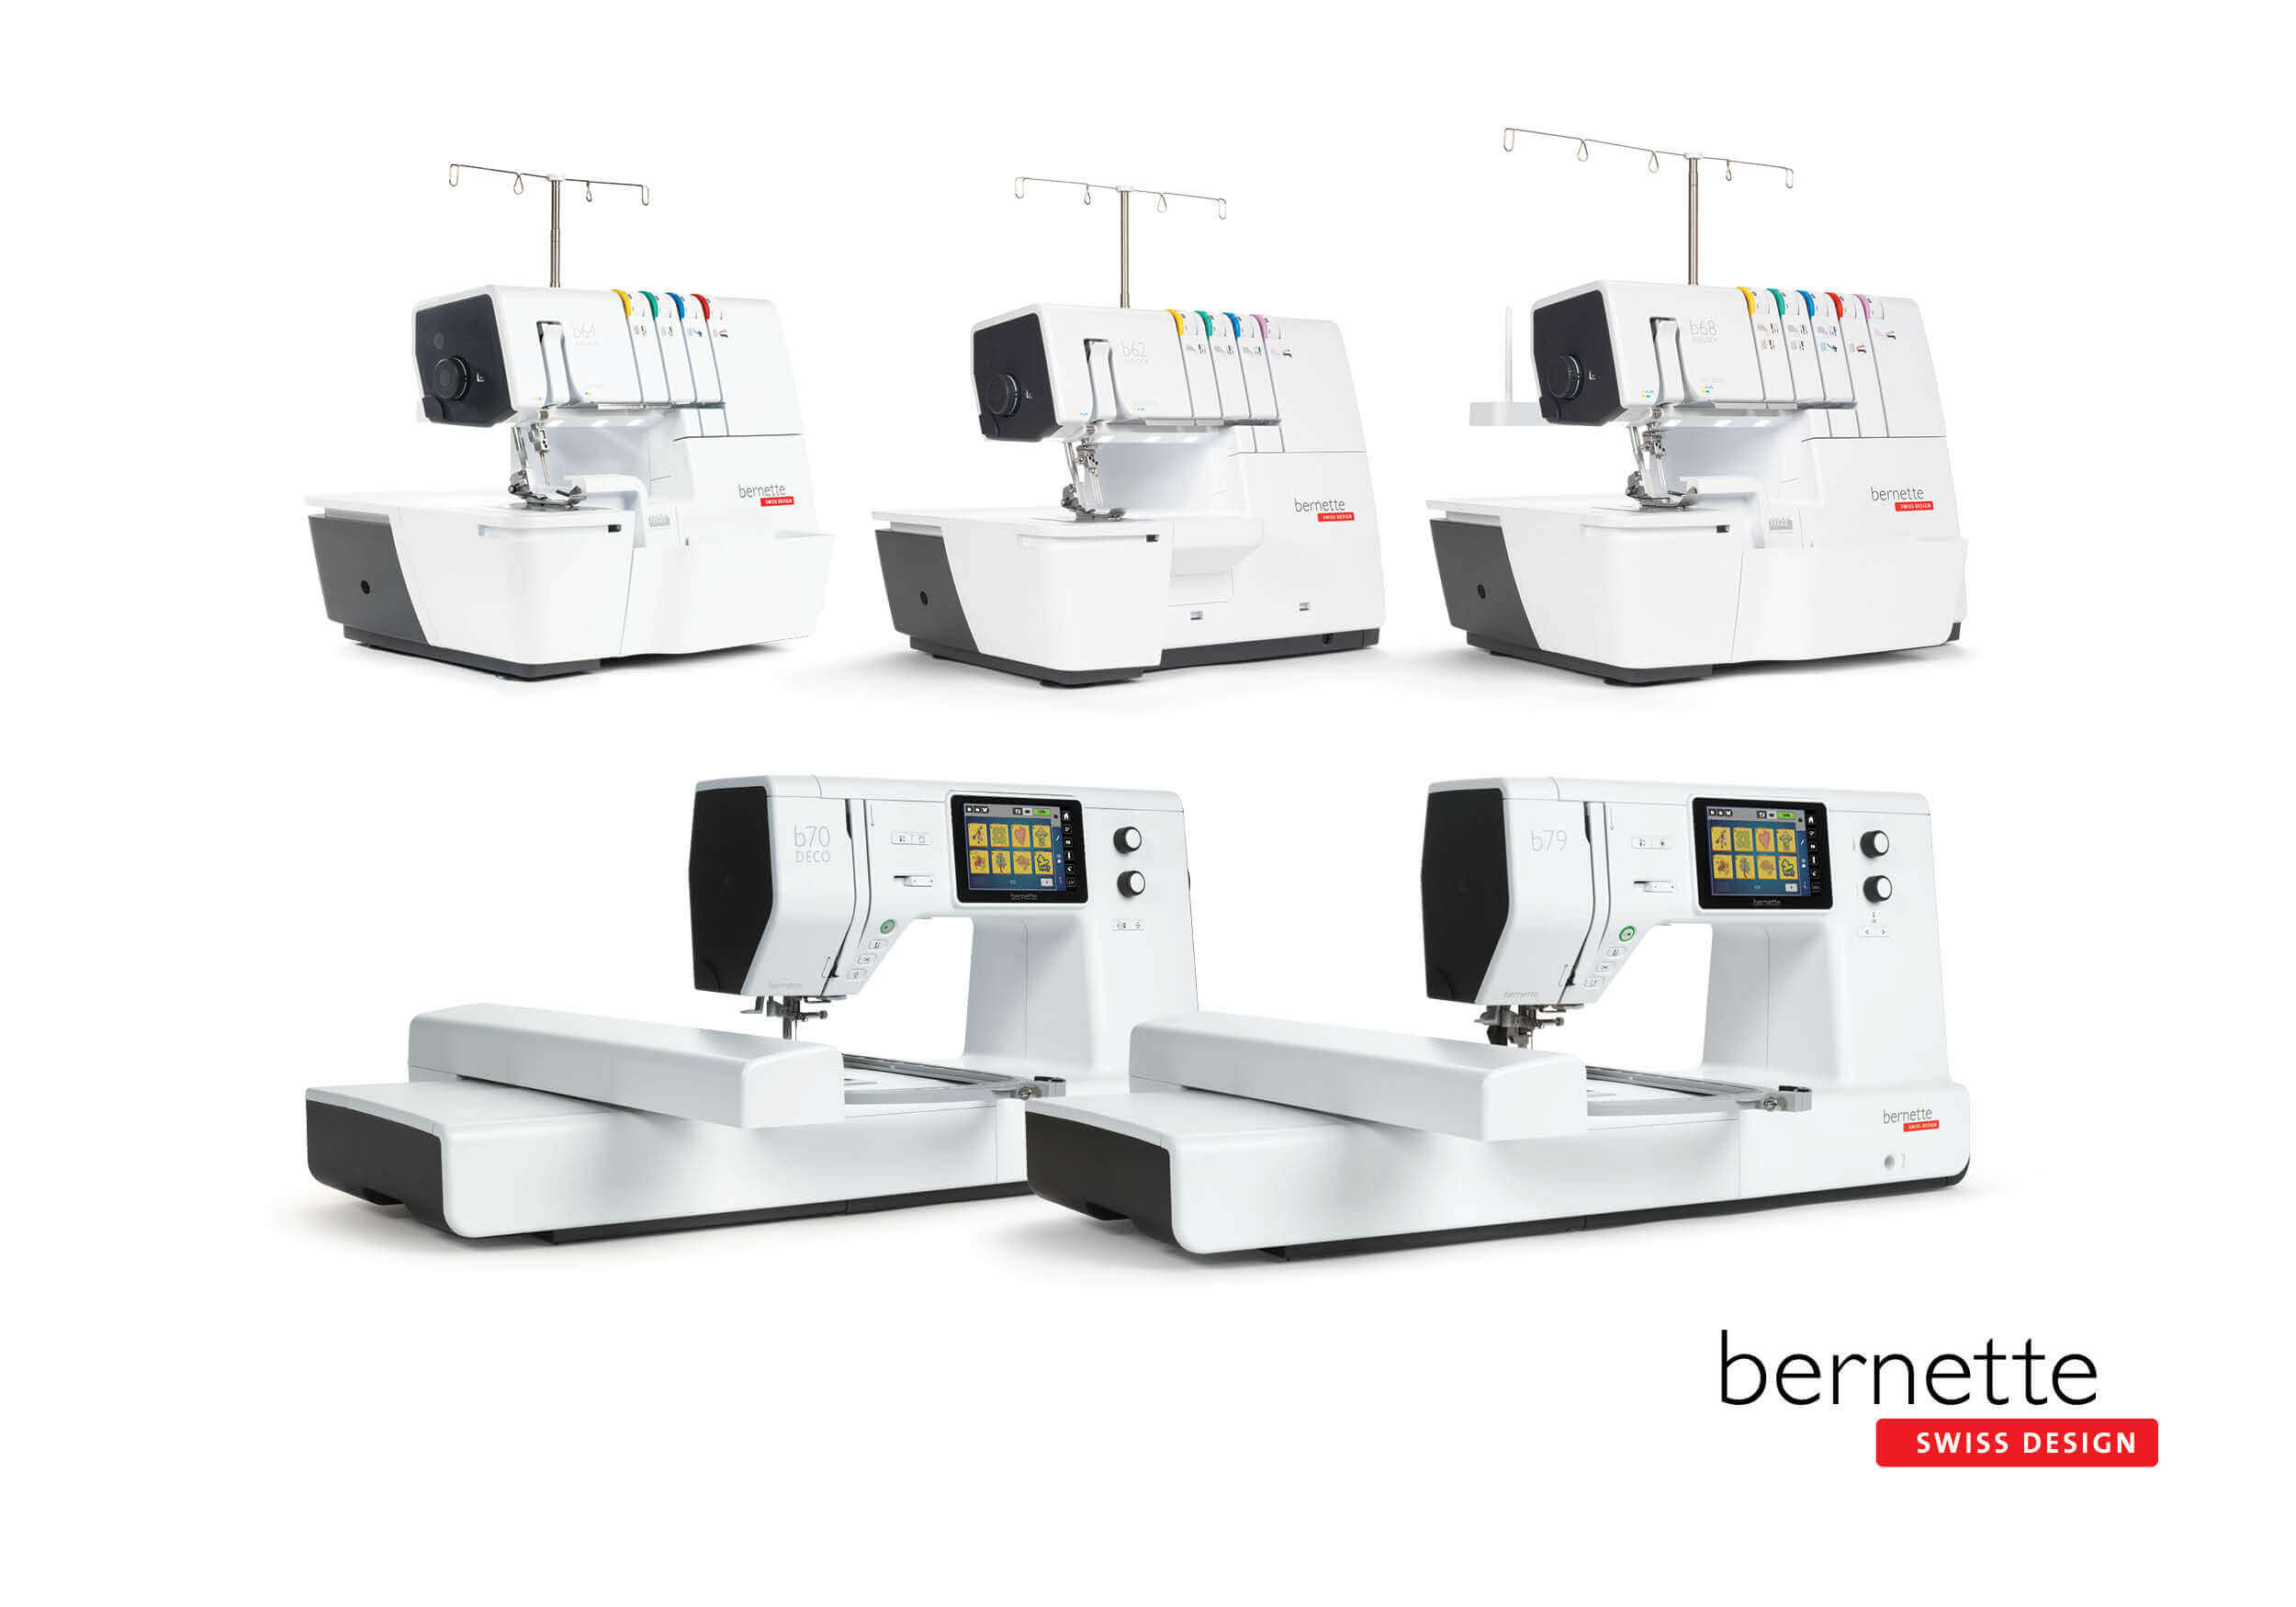 bernettes are budding!  Enjoy free gifts when you purchase select bernette machines!